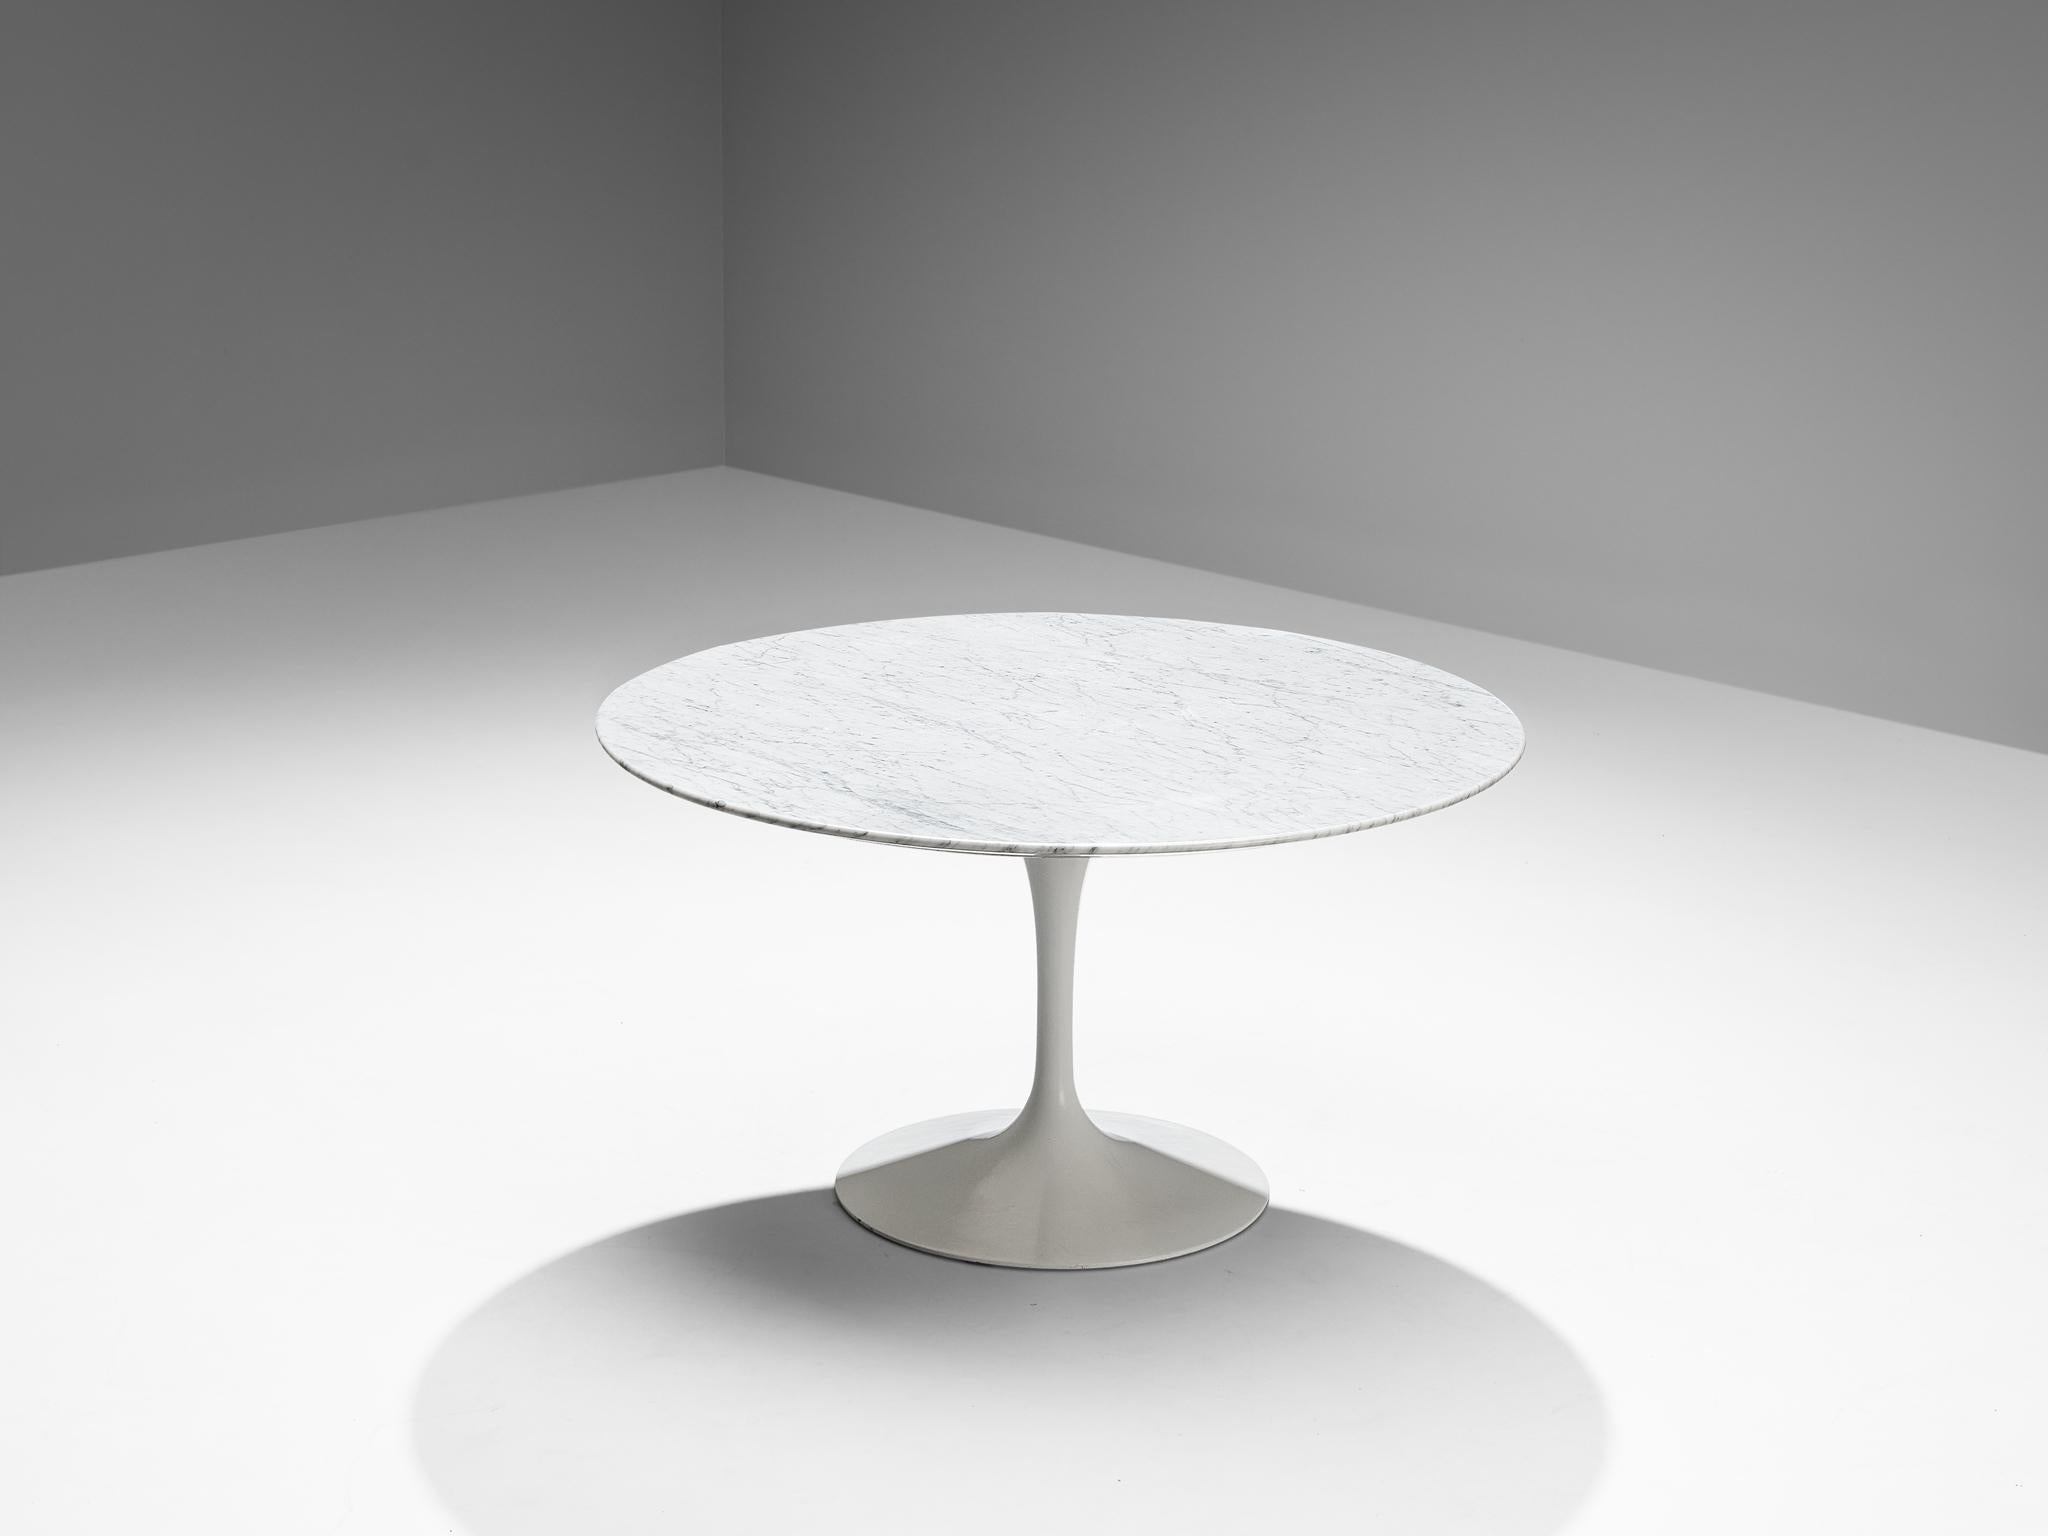 Eero Saarinen for Knoll International, 'Tulip' dining table, Carrara marble, metal, United States, 1950s/1960s

This iconic pedestal table from the Tulip collection is designed by Eero Saarinen in the 1950s and it took him five years to arrive at